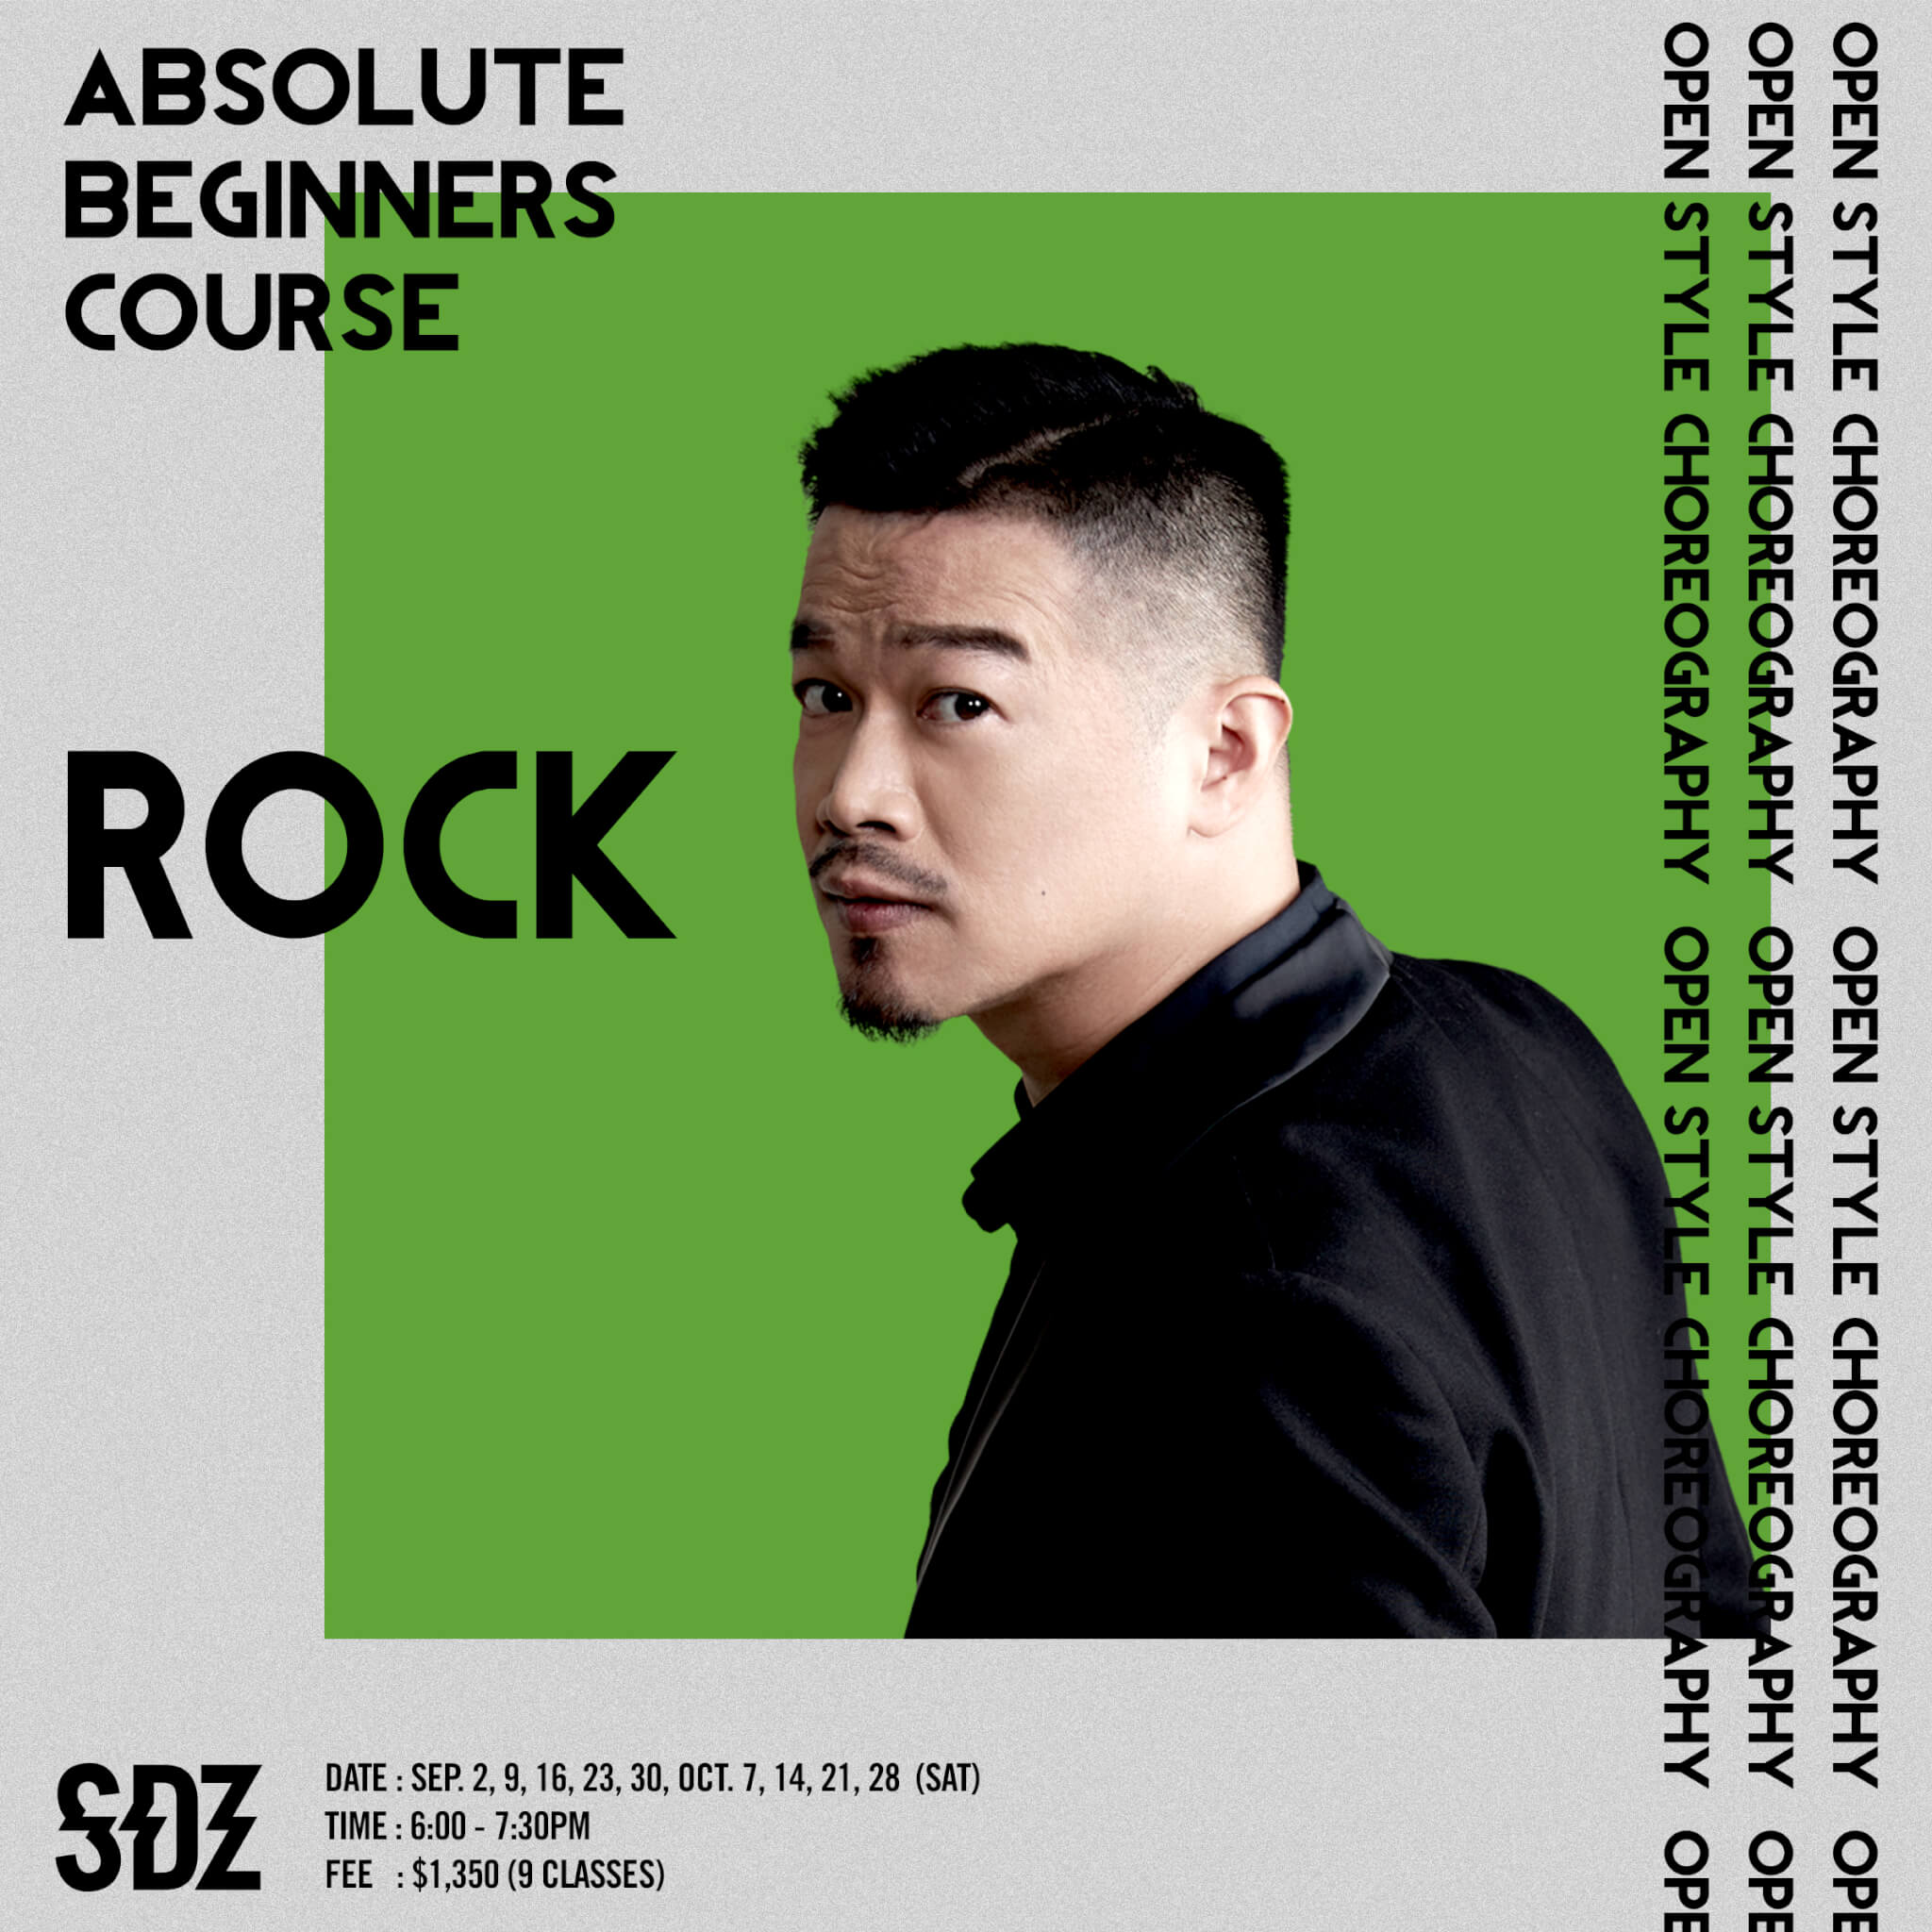 Absolute Beginners Course - Open Style Choreography -Rock